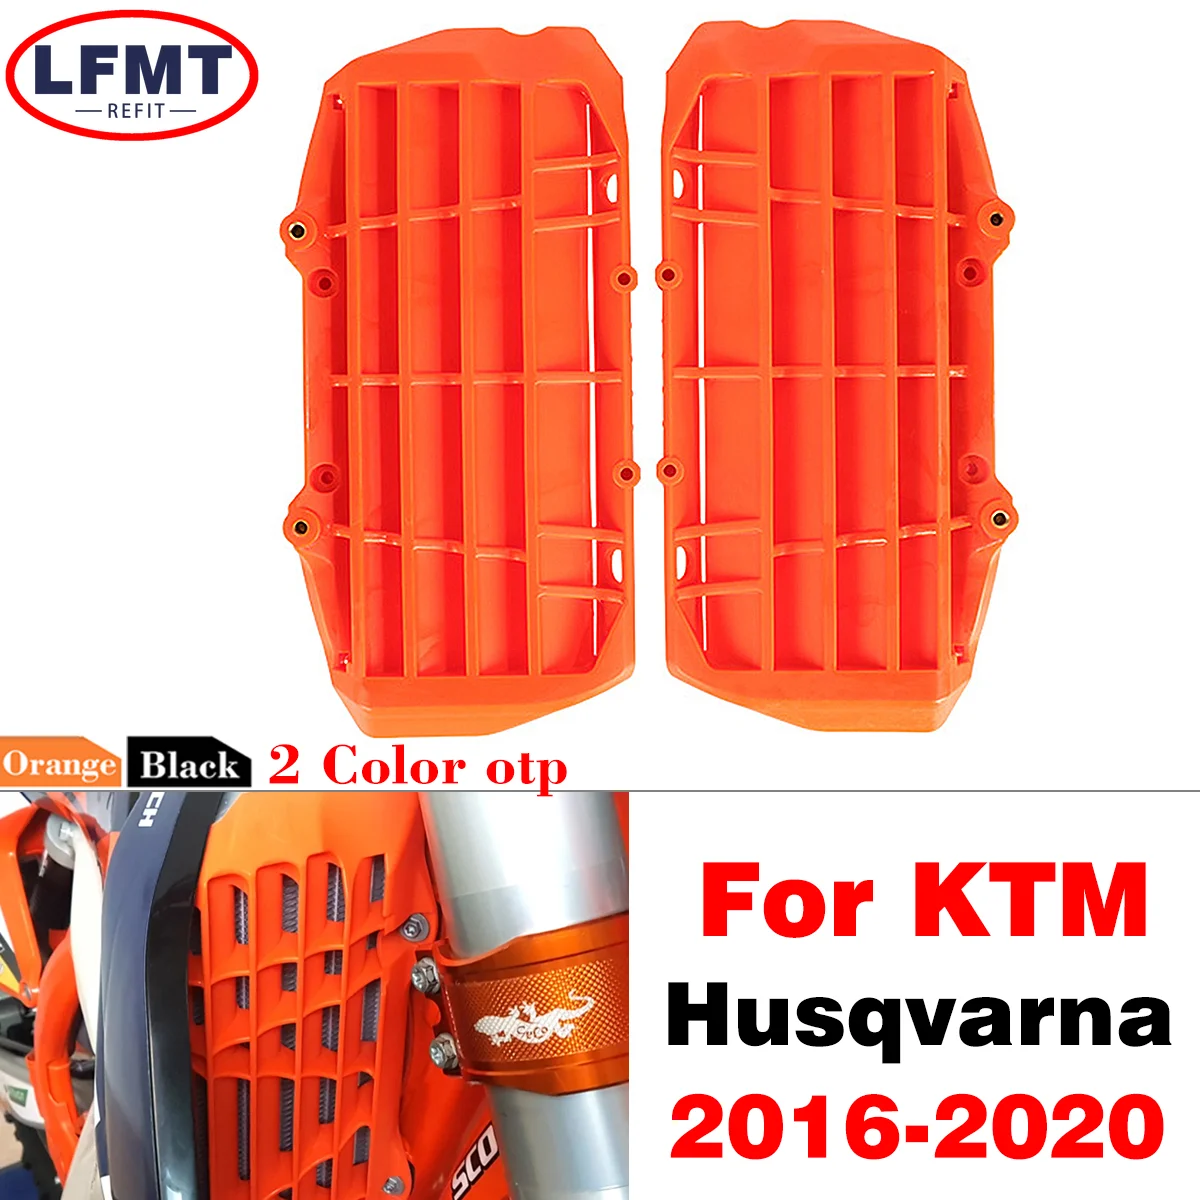 

For KTM EXC XCF XC SXF TPI Six Days 125 250 300 350 400 450 500 Radiator Grille Guard Grill Cover Protector Plastics 2016-2020